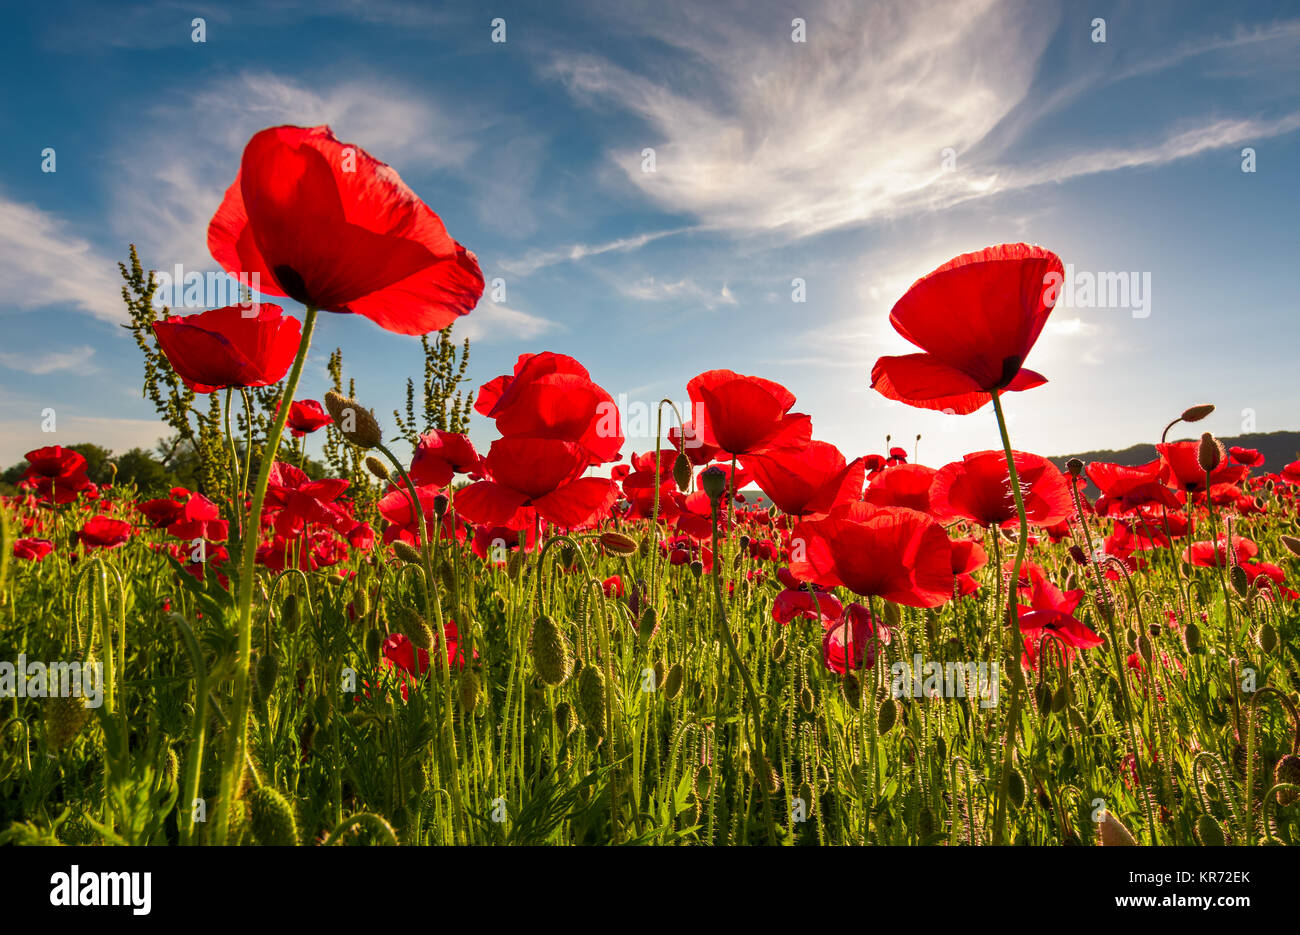 of red poppy flower with sunburst shot from below. beautiful nature background against the blue sky Photo - Alamy